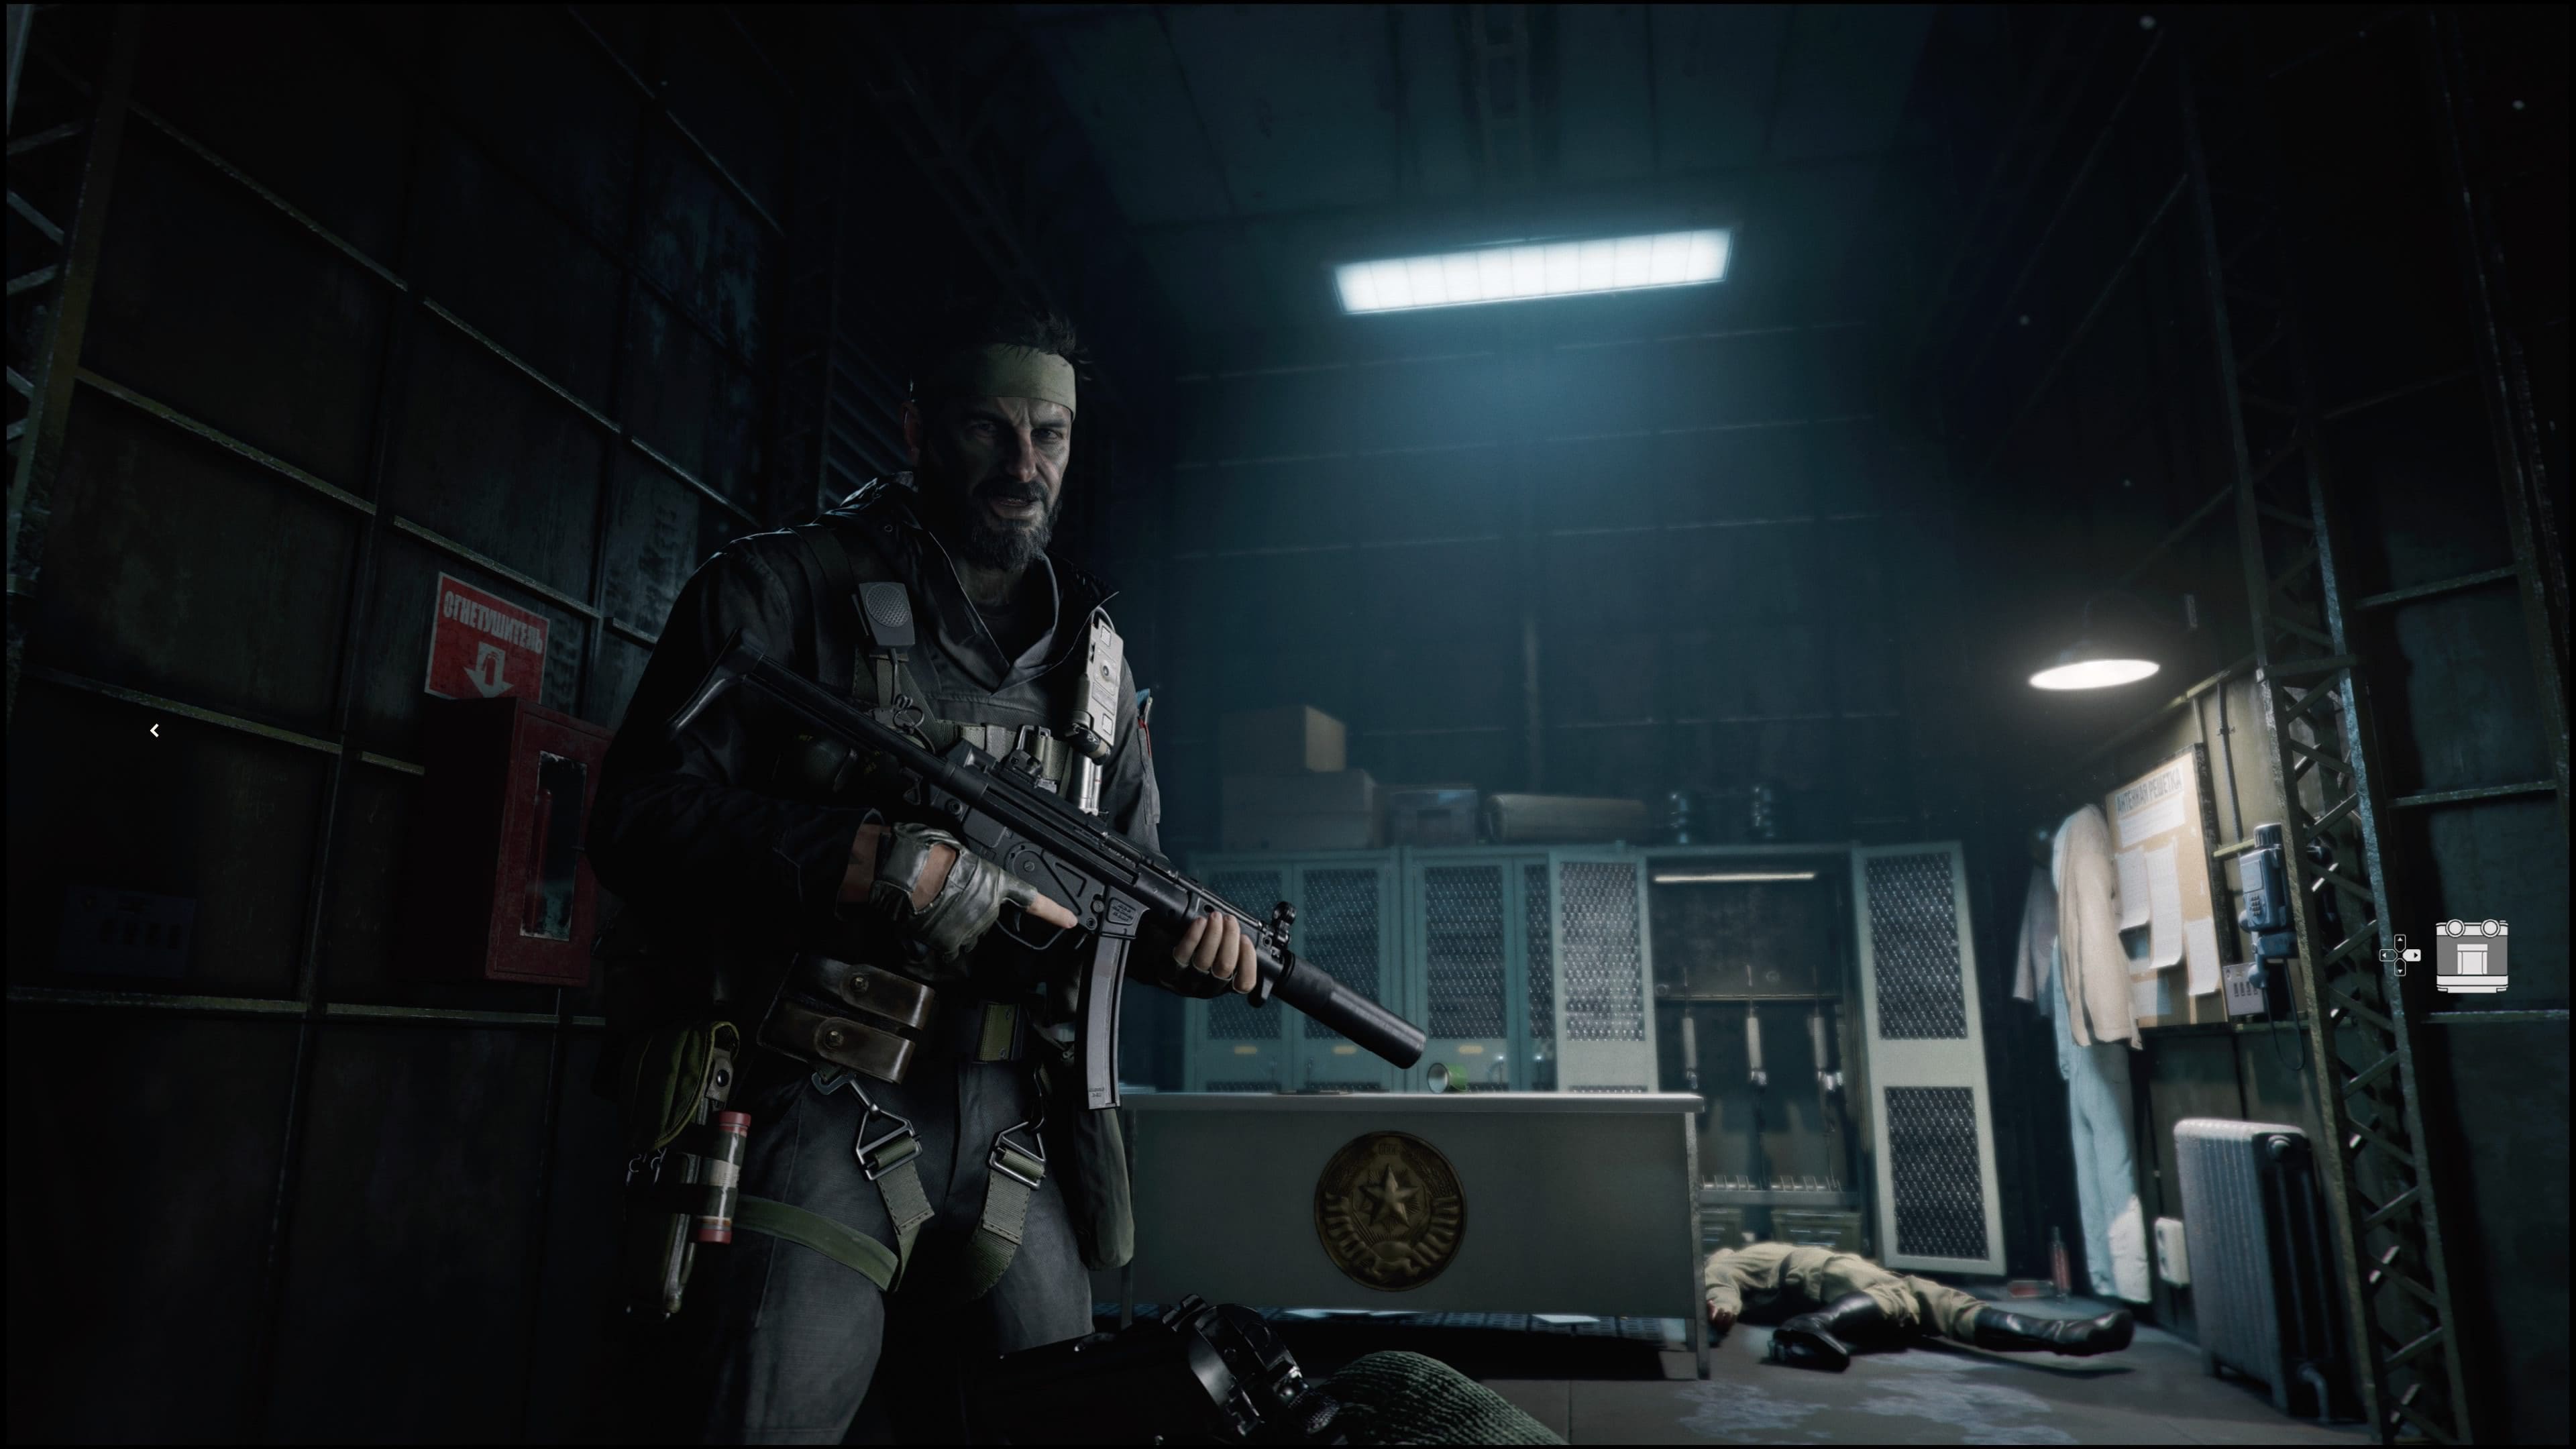 Modern Warfare 3 Zombies teaser hints at ties with Black Ops Cold War  universe